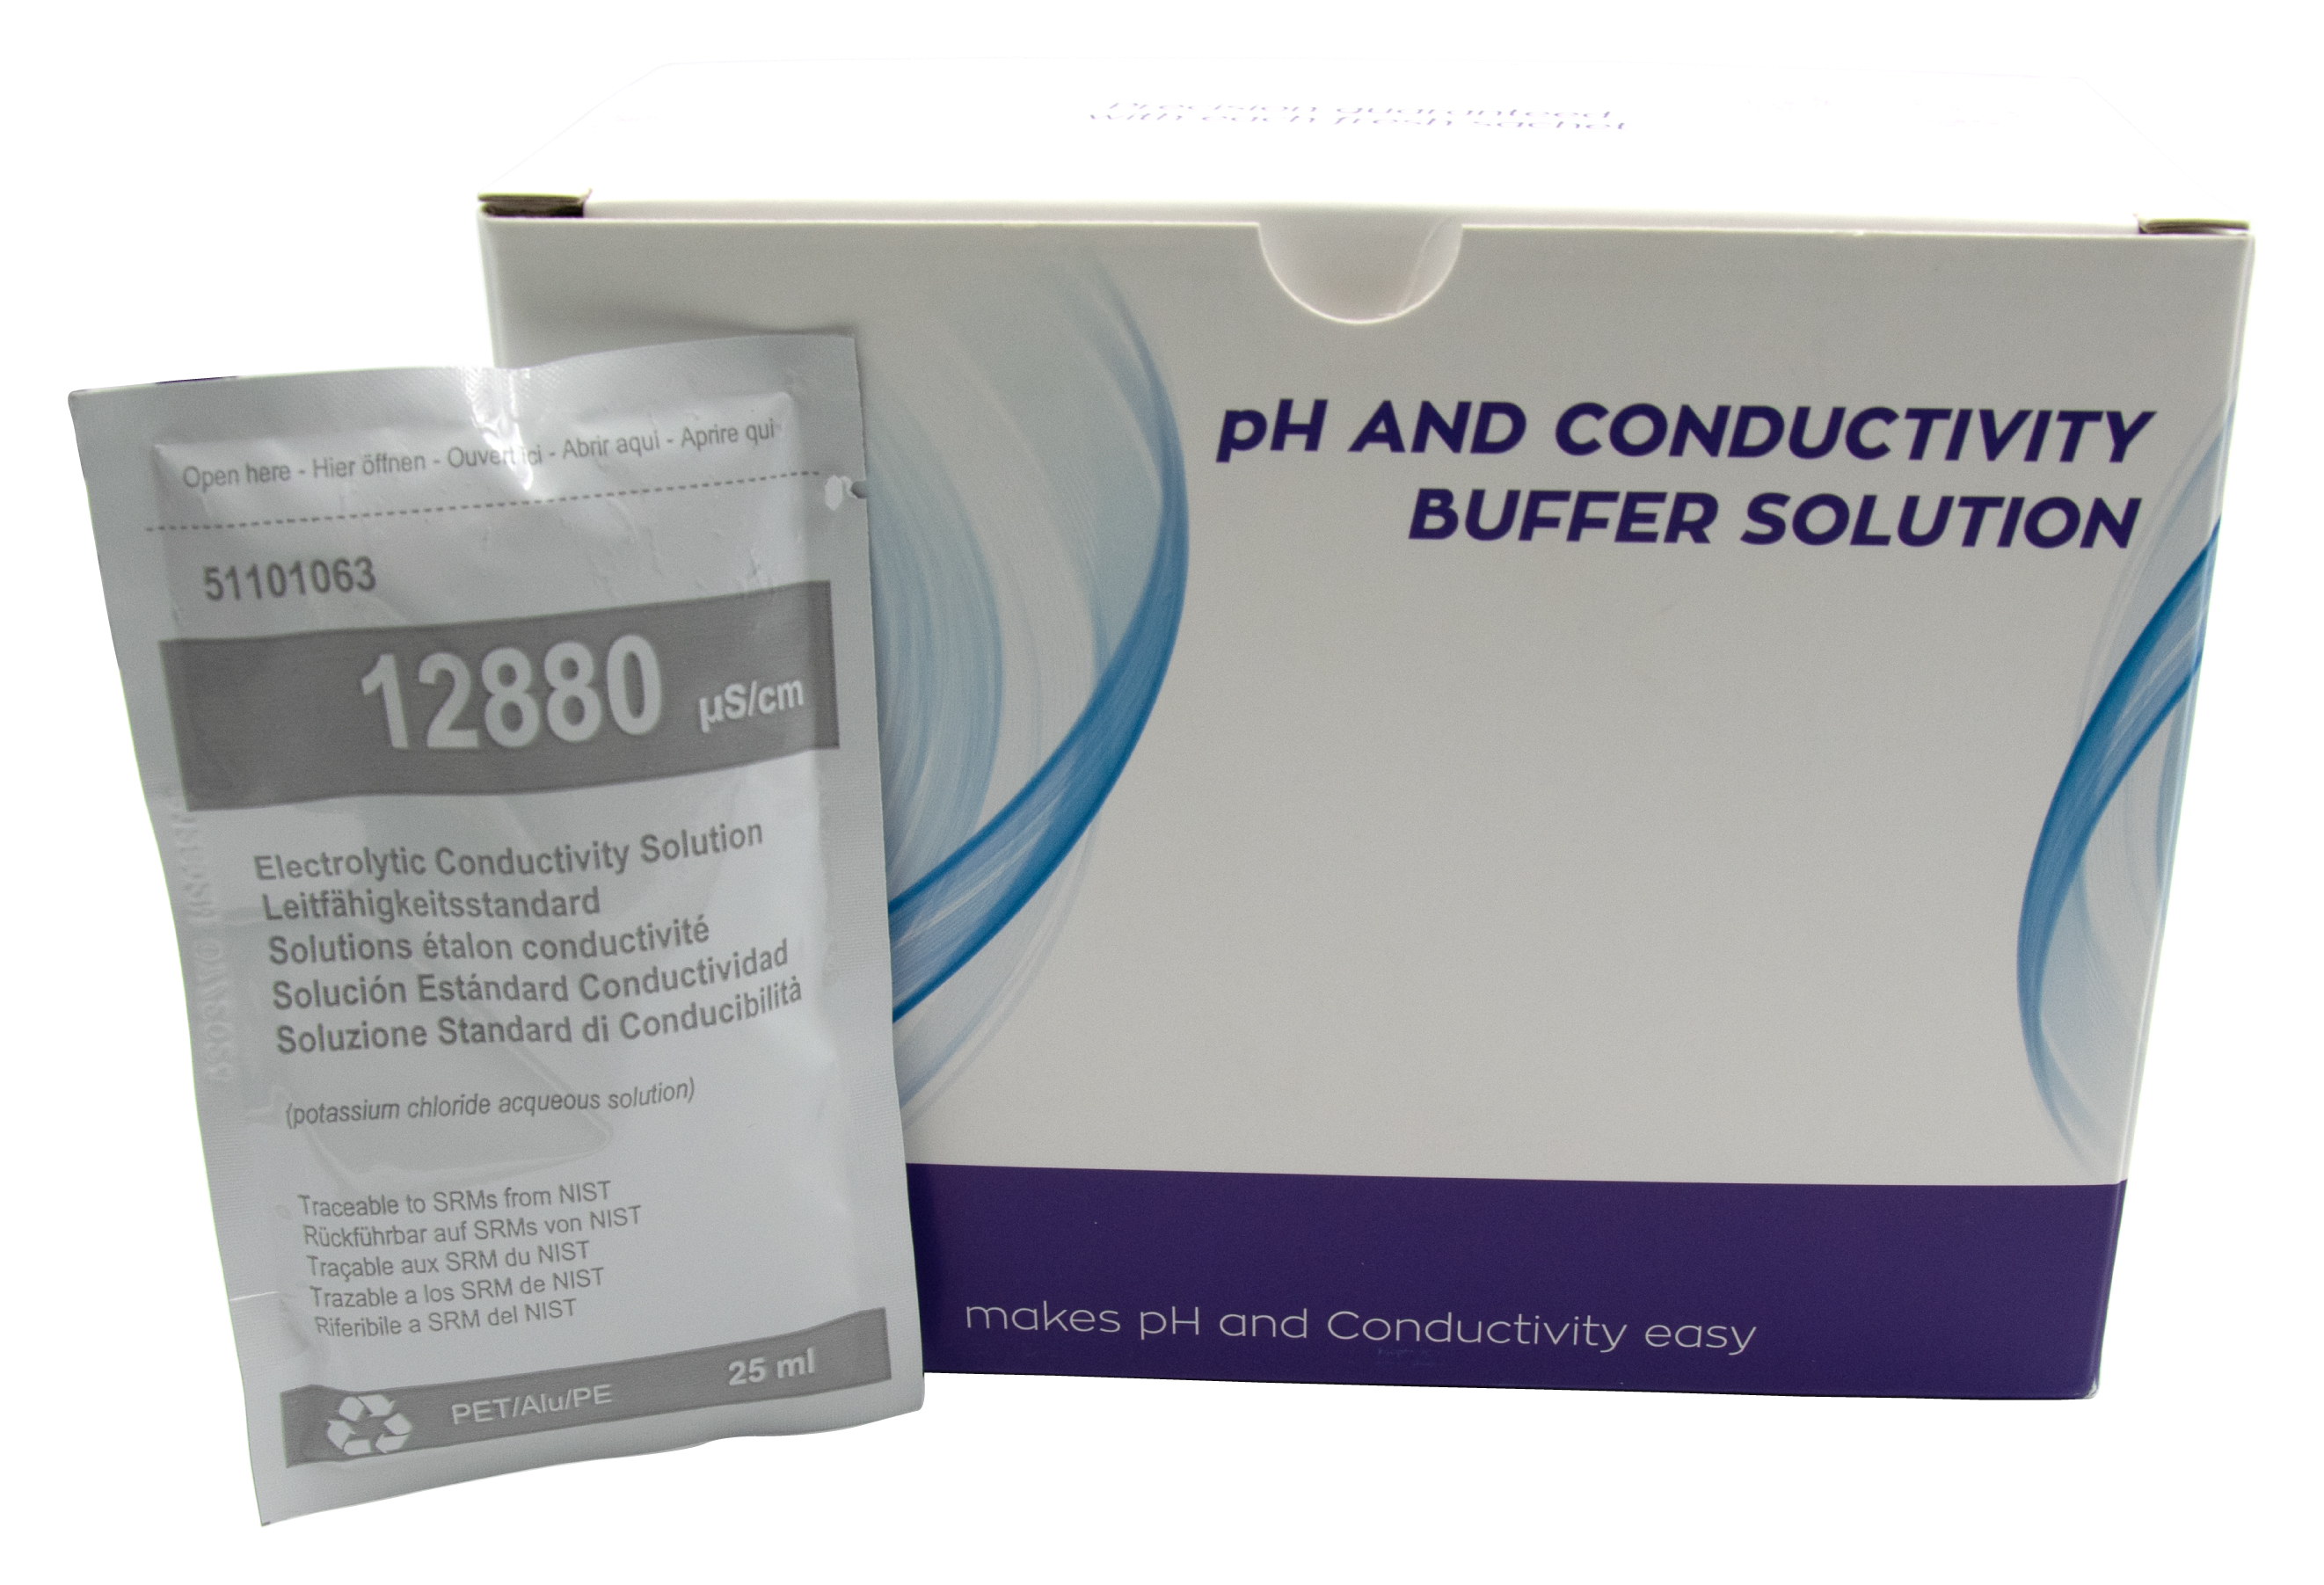 XS BASIC EC 12880 µS/cm (25°C) Buffer solution pack with 20 sachets of 25ml with certificate of analysis